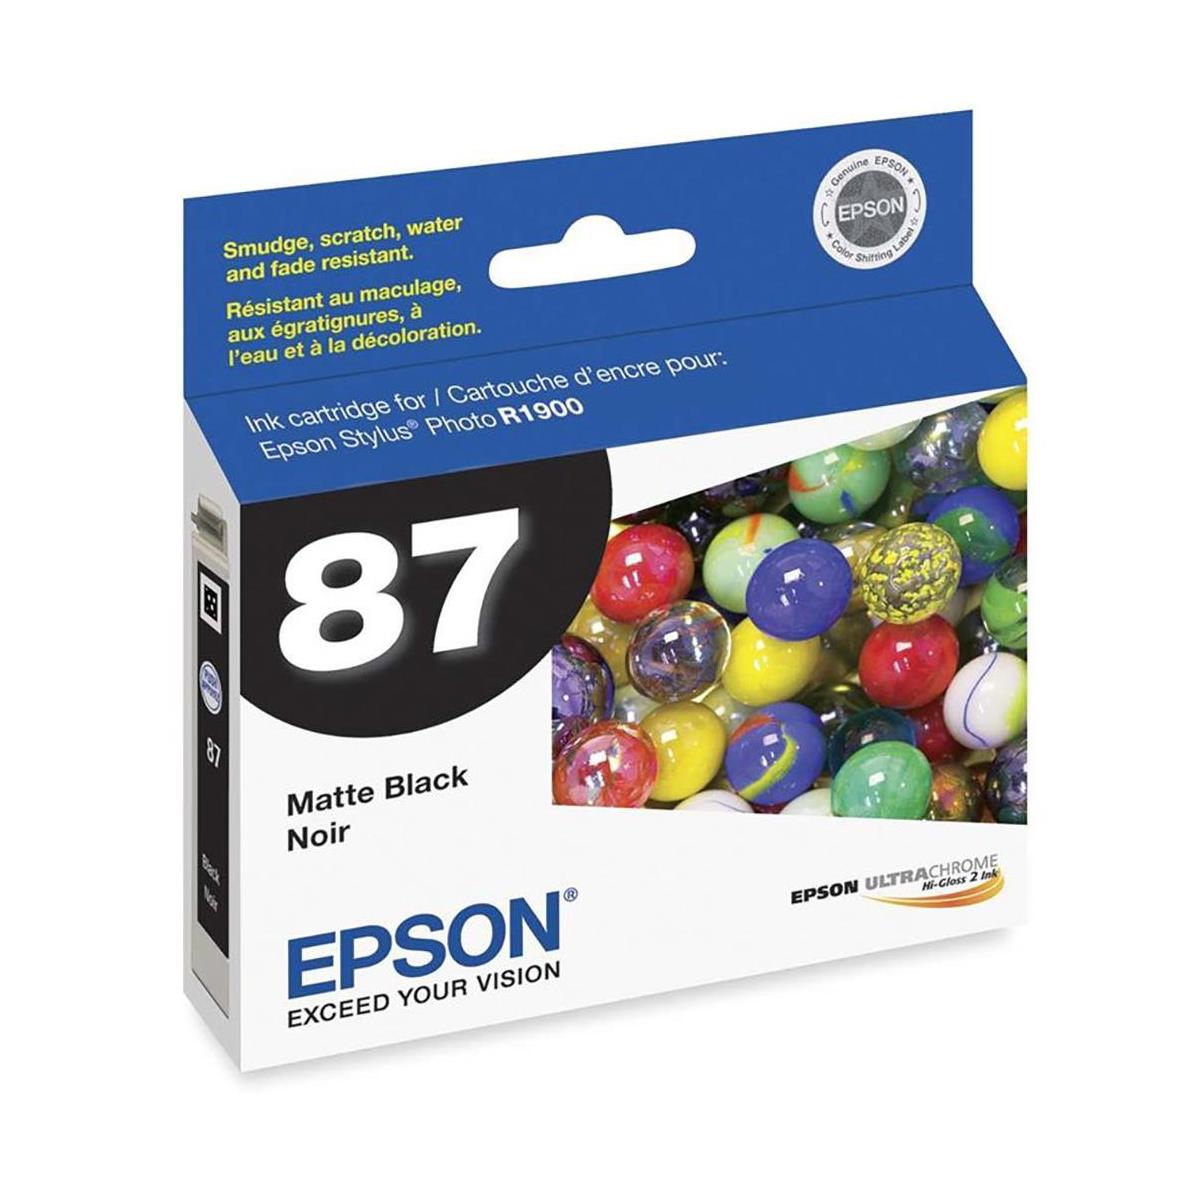 Image of Epson T087820 Cartridge for Stylus R1900